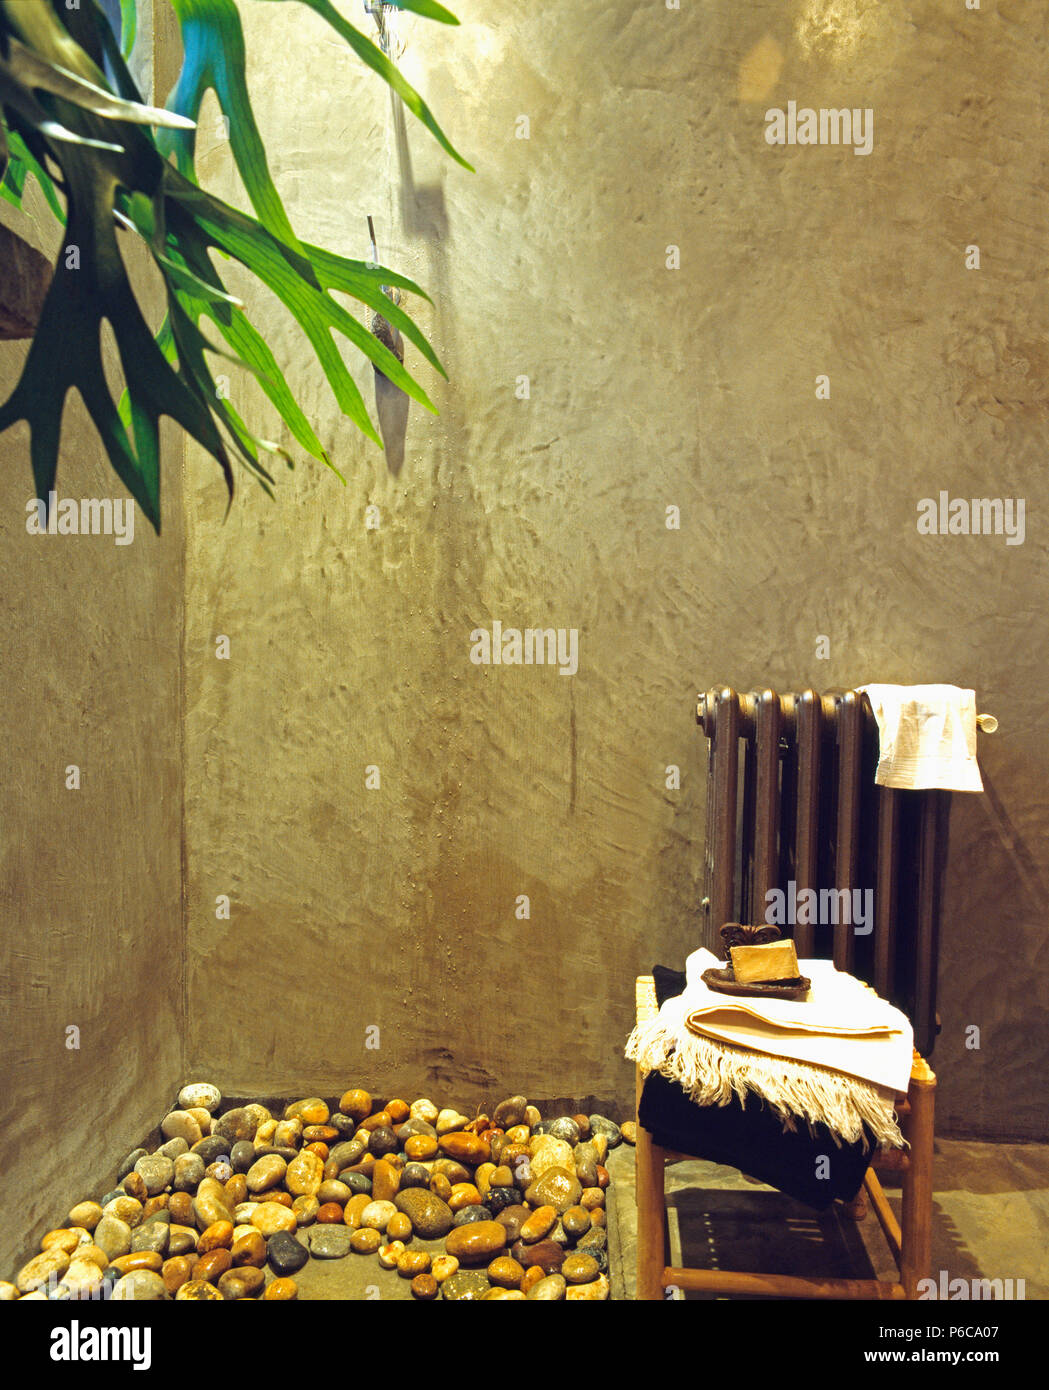 Concrete walls and pebbles on floor of shower with towels beside vintage radiator Stock Photo